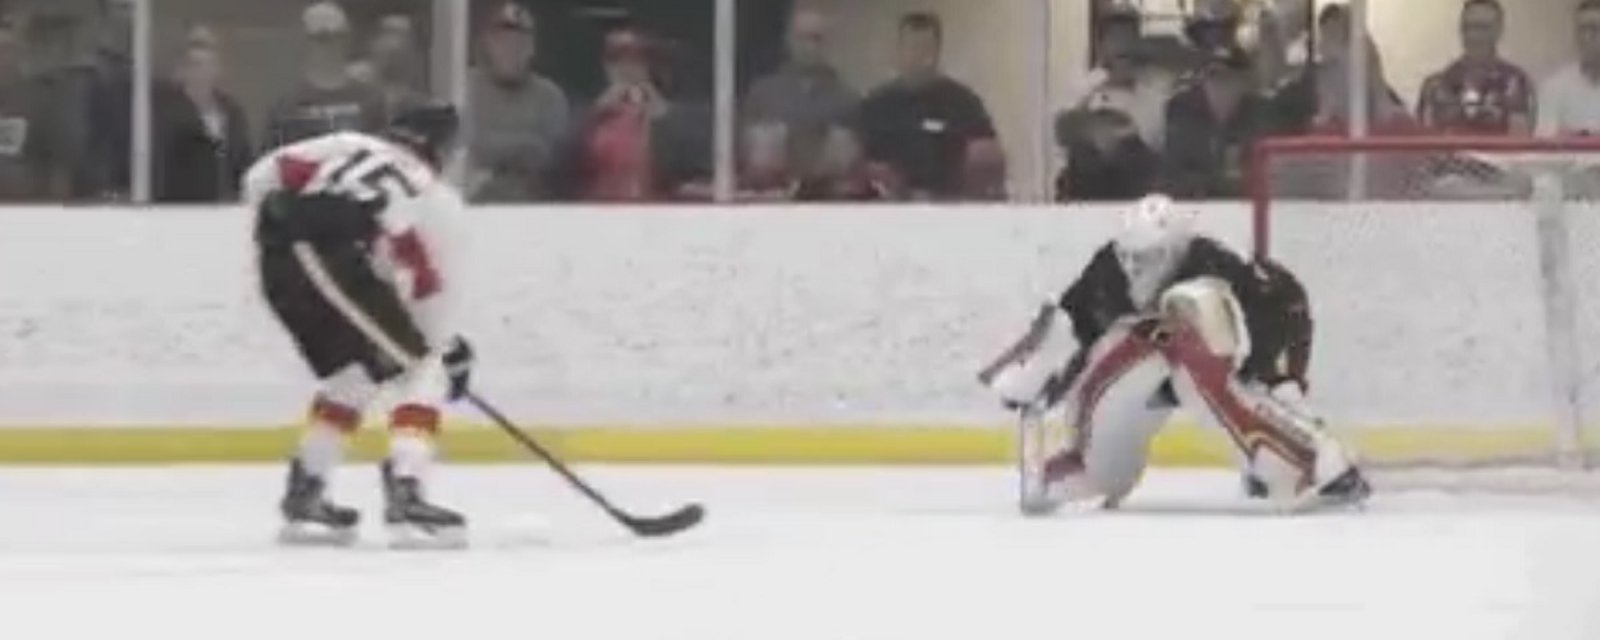 College standout shows off some filthy moves in development camp.